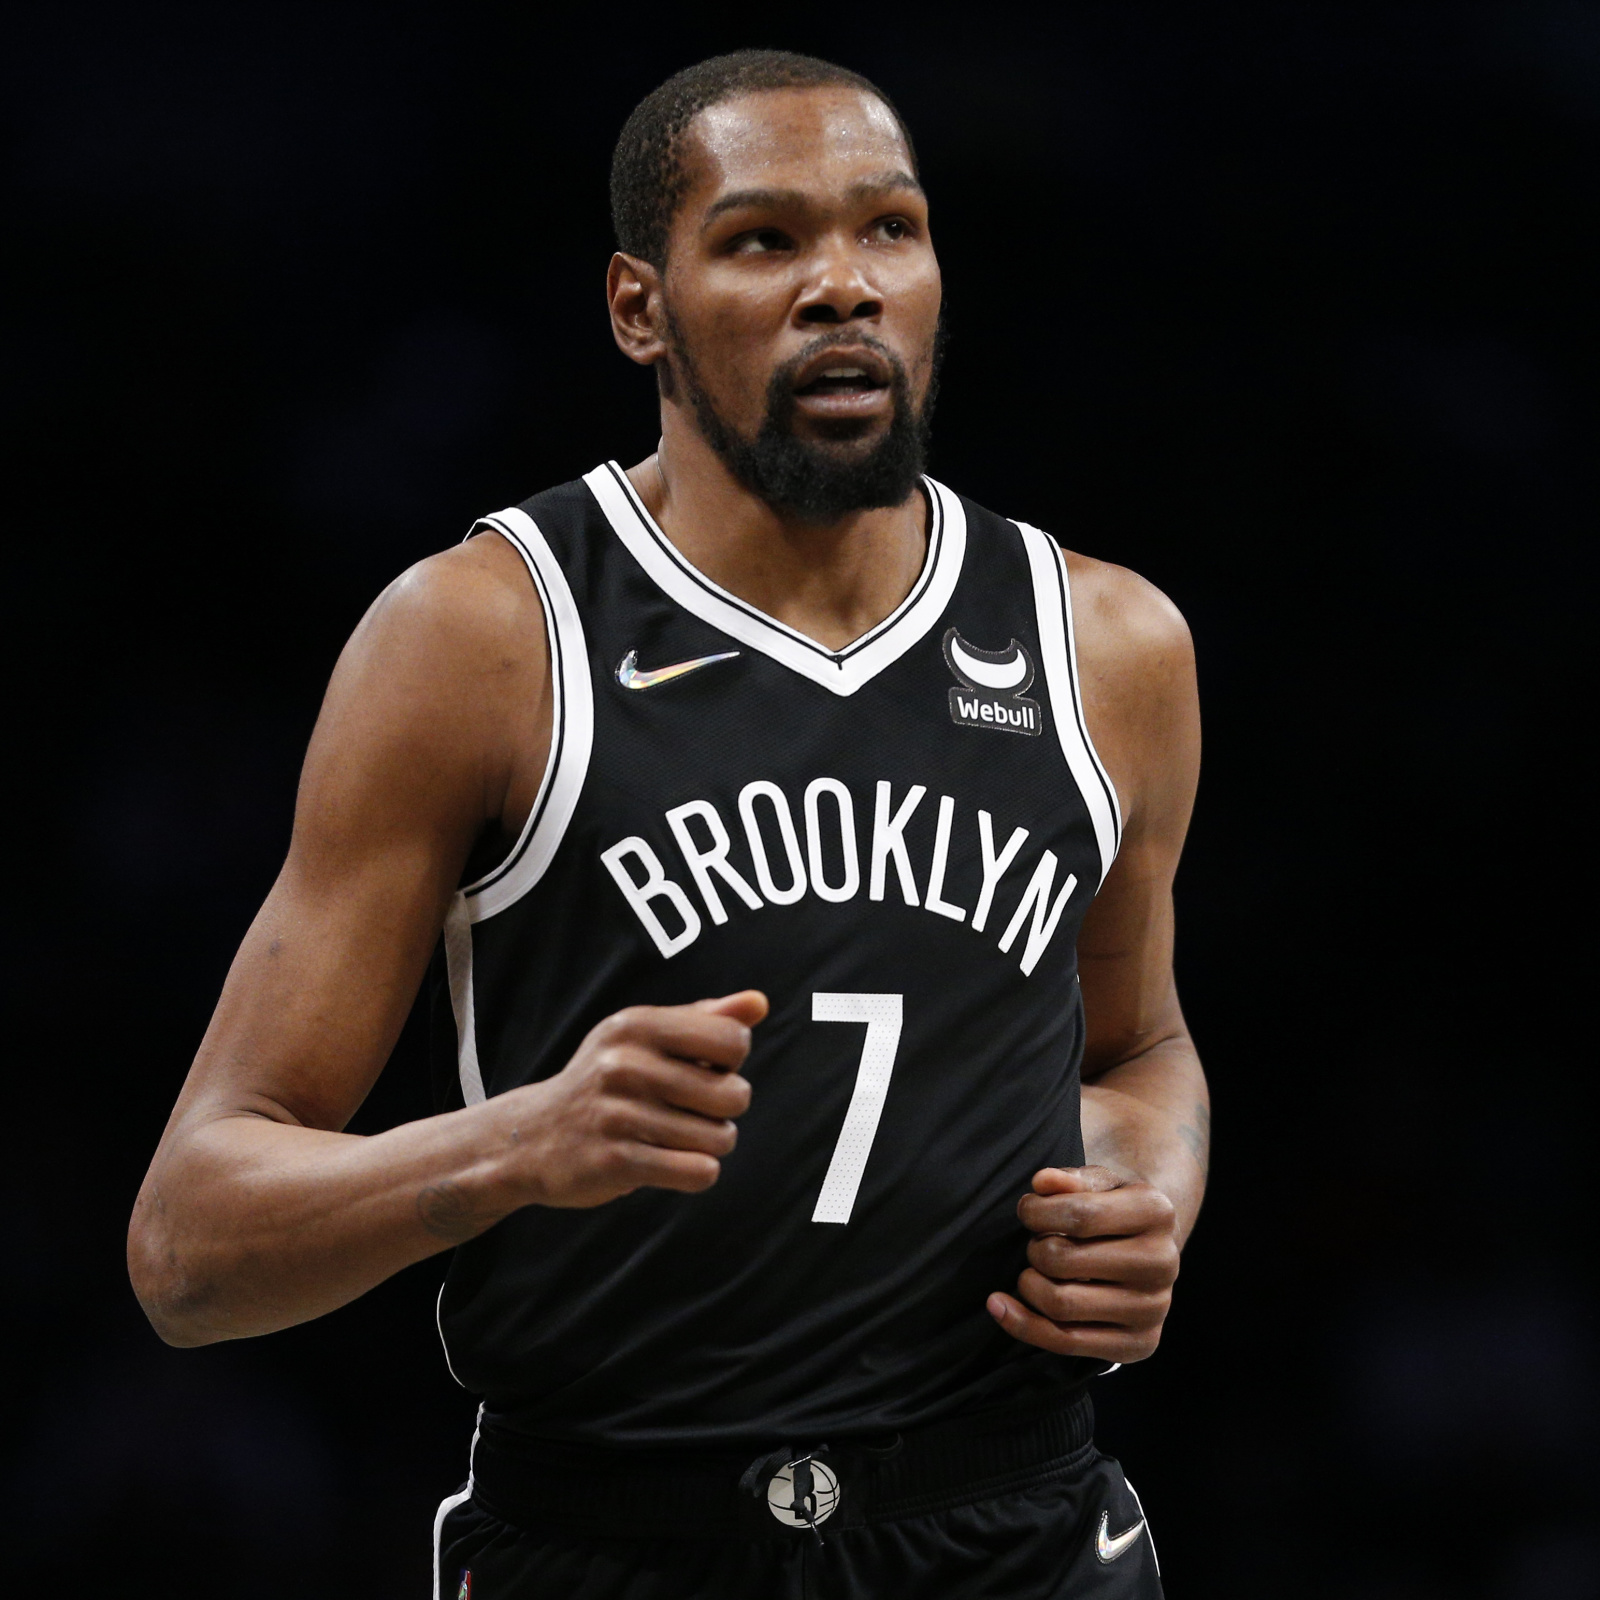 Nets star Kevin Durant opens up on his latest knee injury